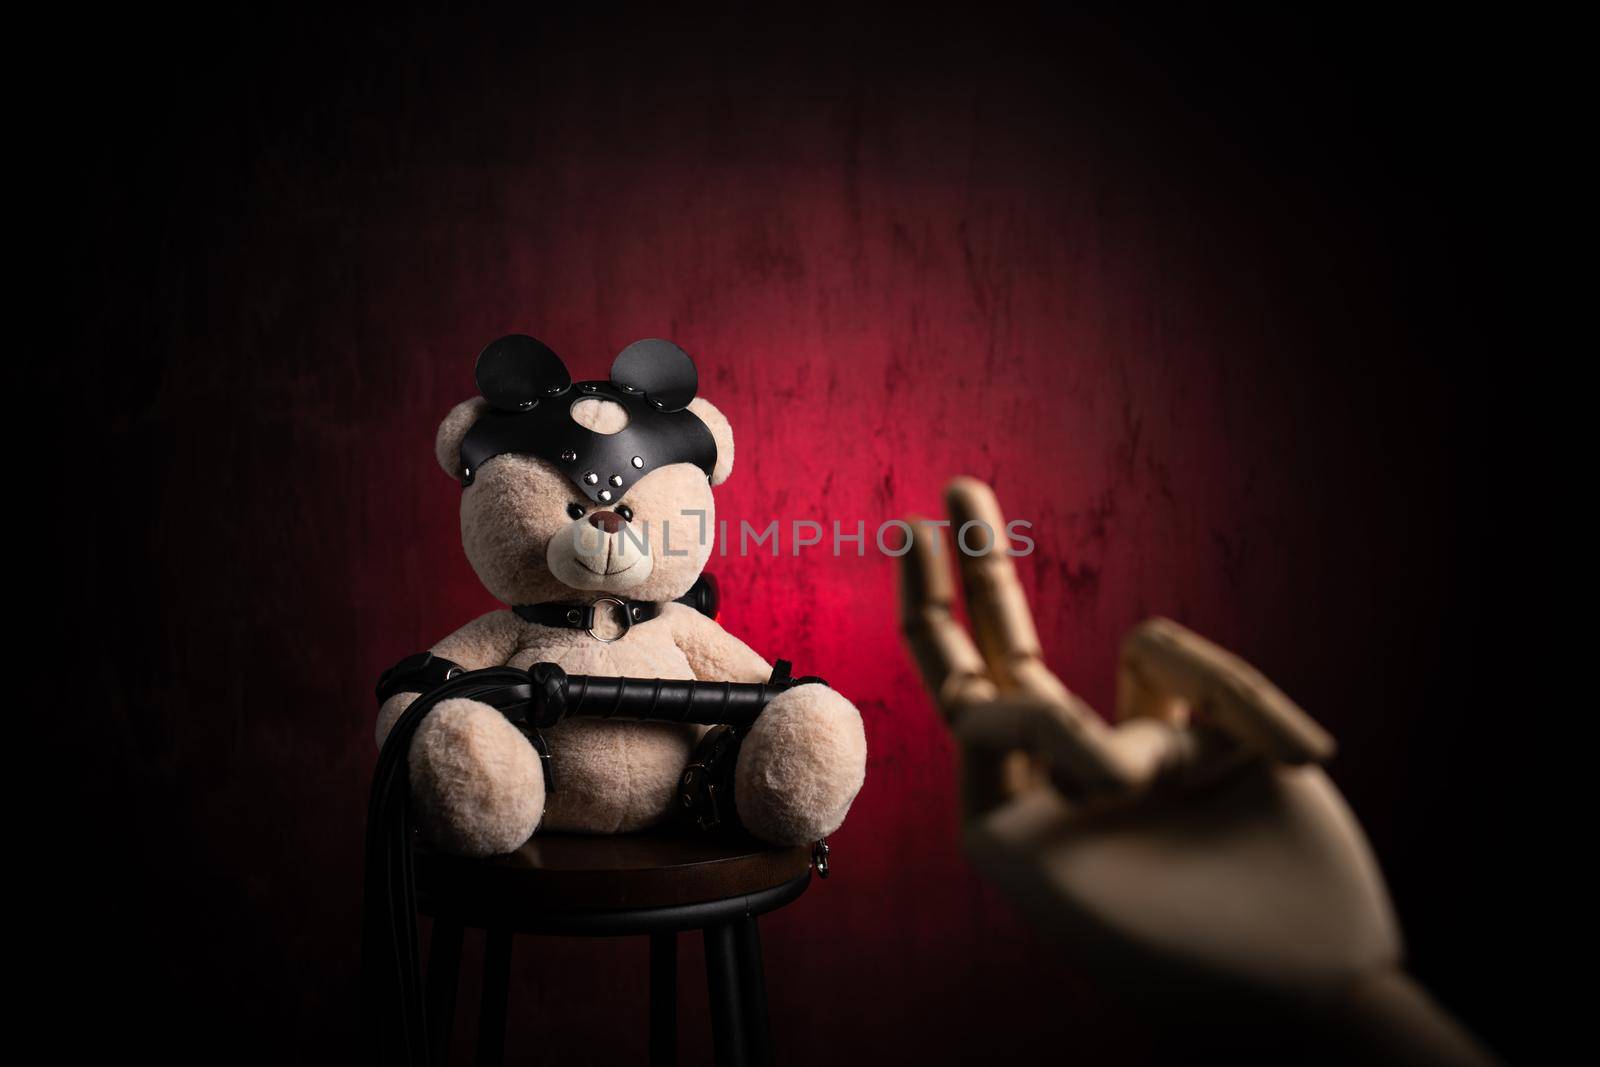 the toy teddy bear with a whip, dressed in leather belts and a mask, an accessory for BDSM games with a wooden hand and a sexual gesture